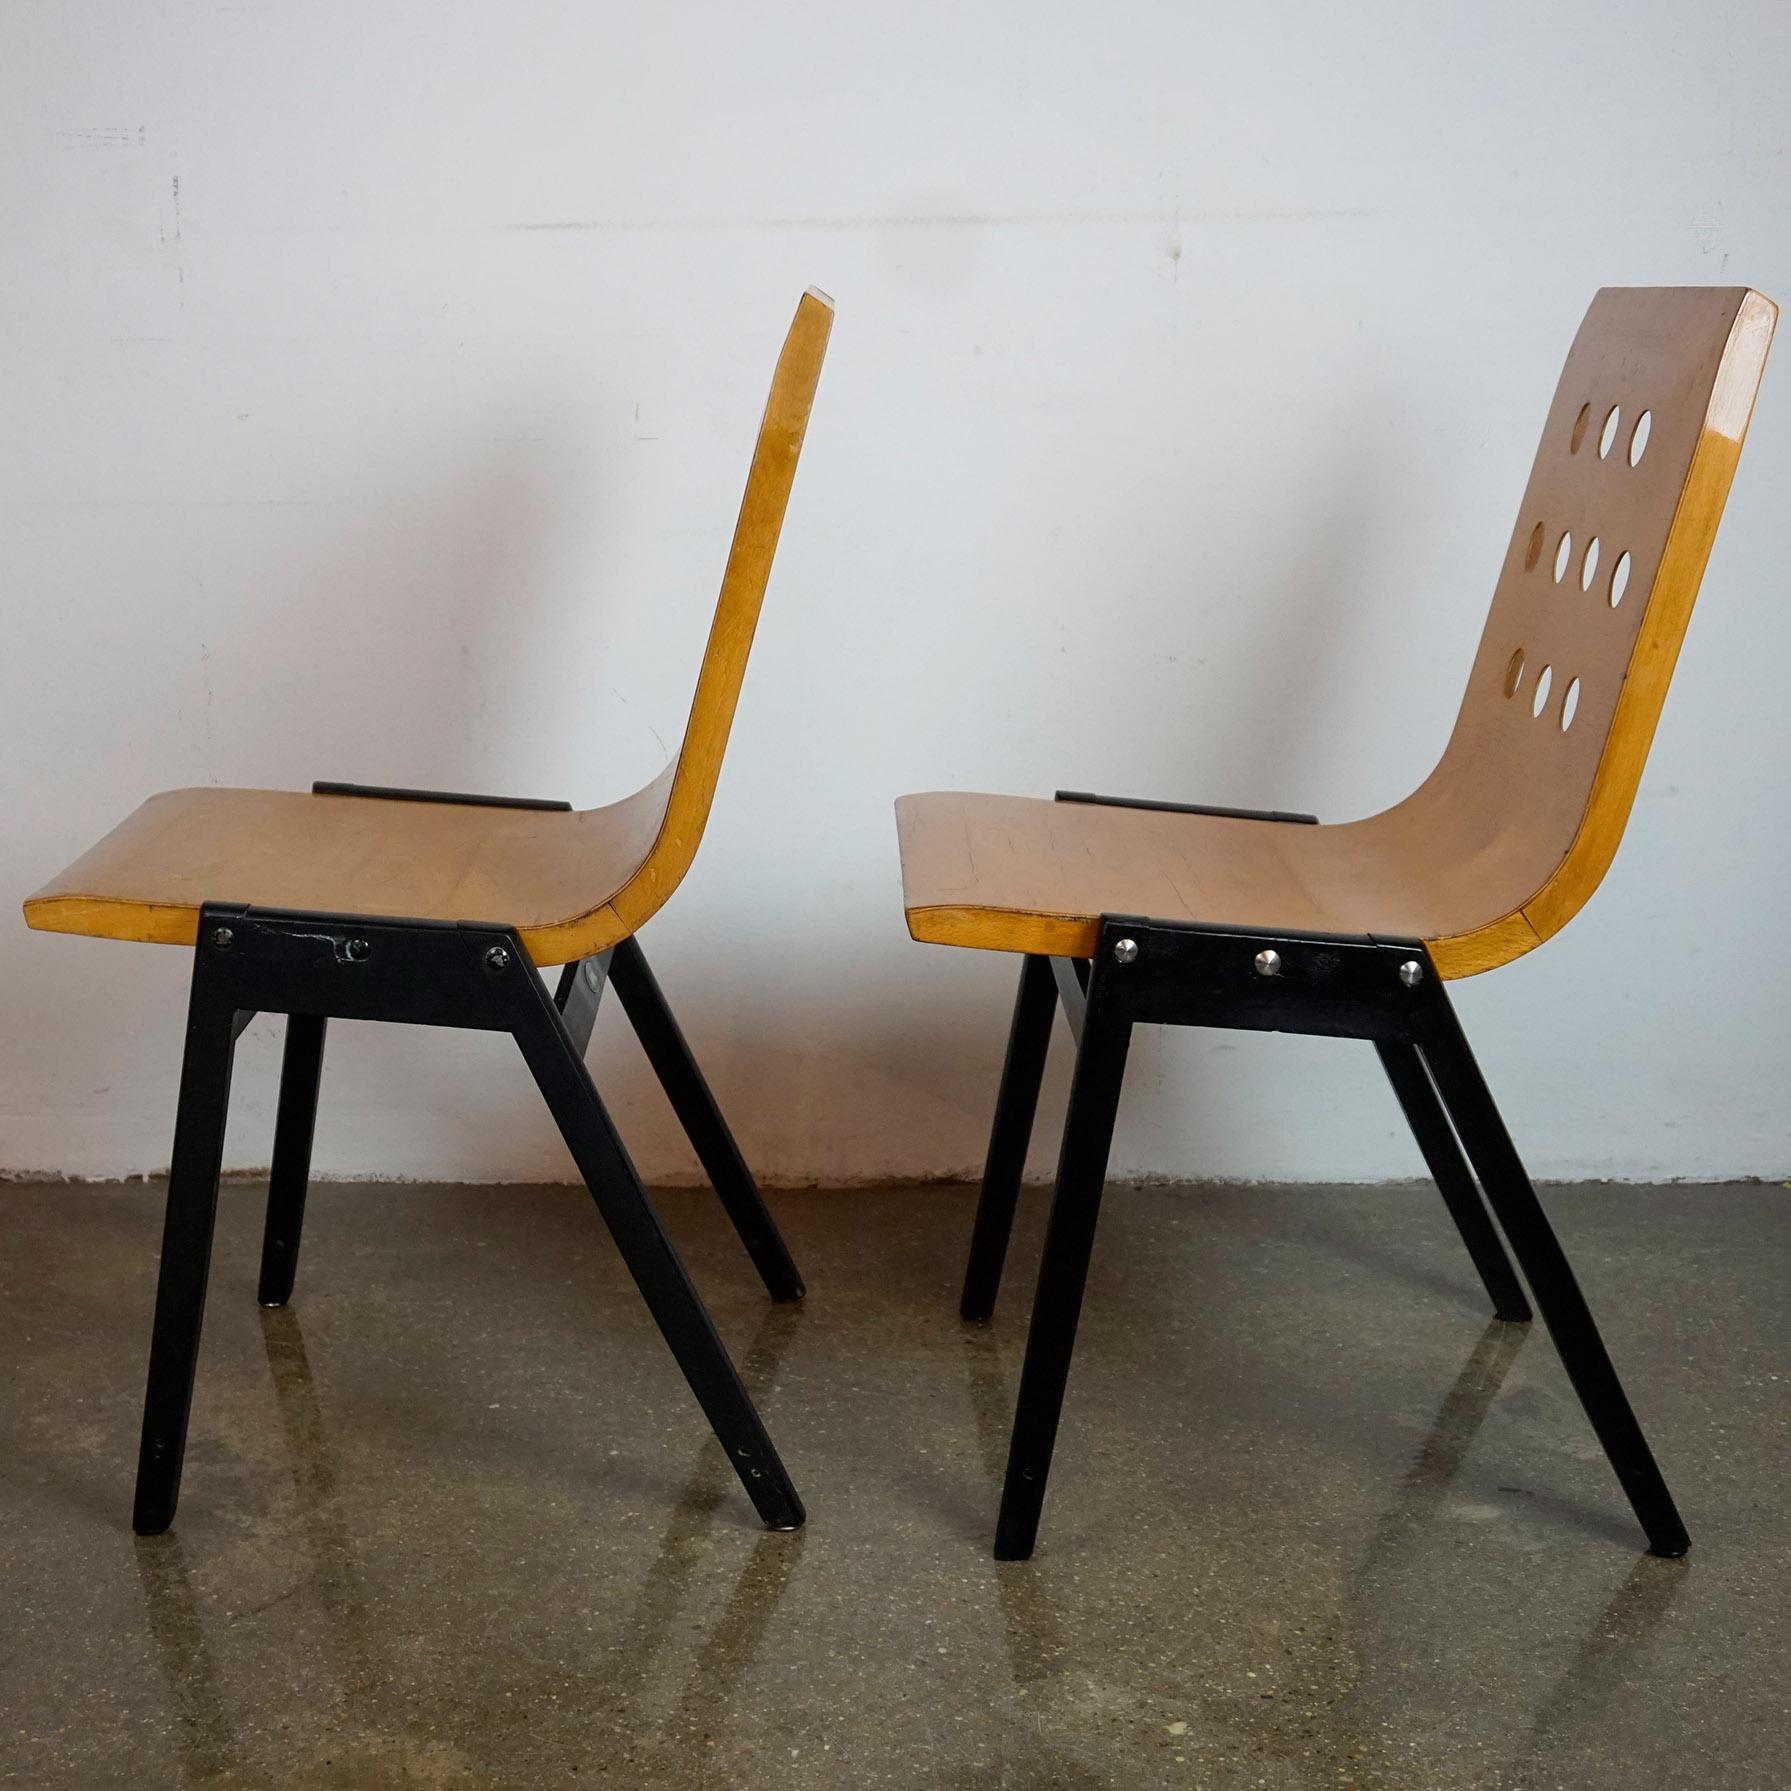 Pair of Austrian Midcentury Roland Rainer Beech Stacking Chairs 1